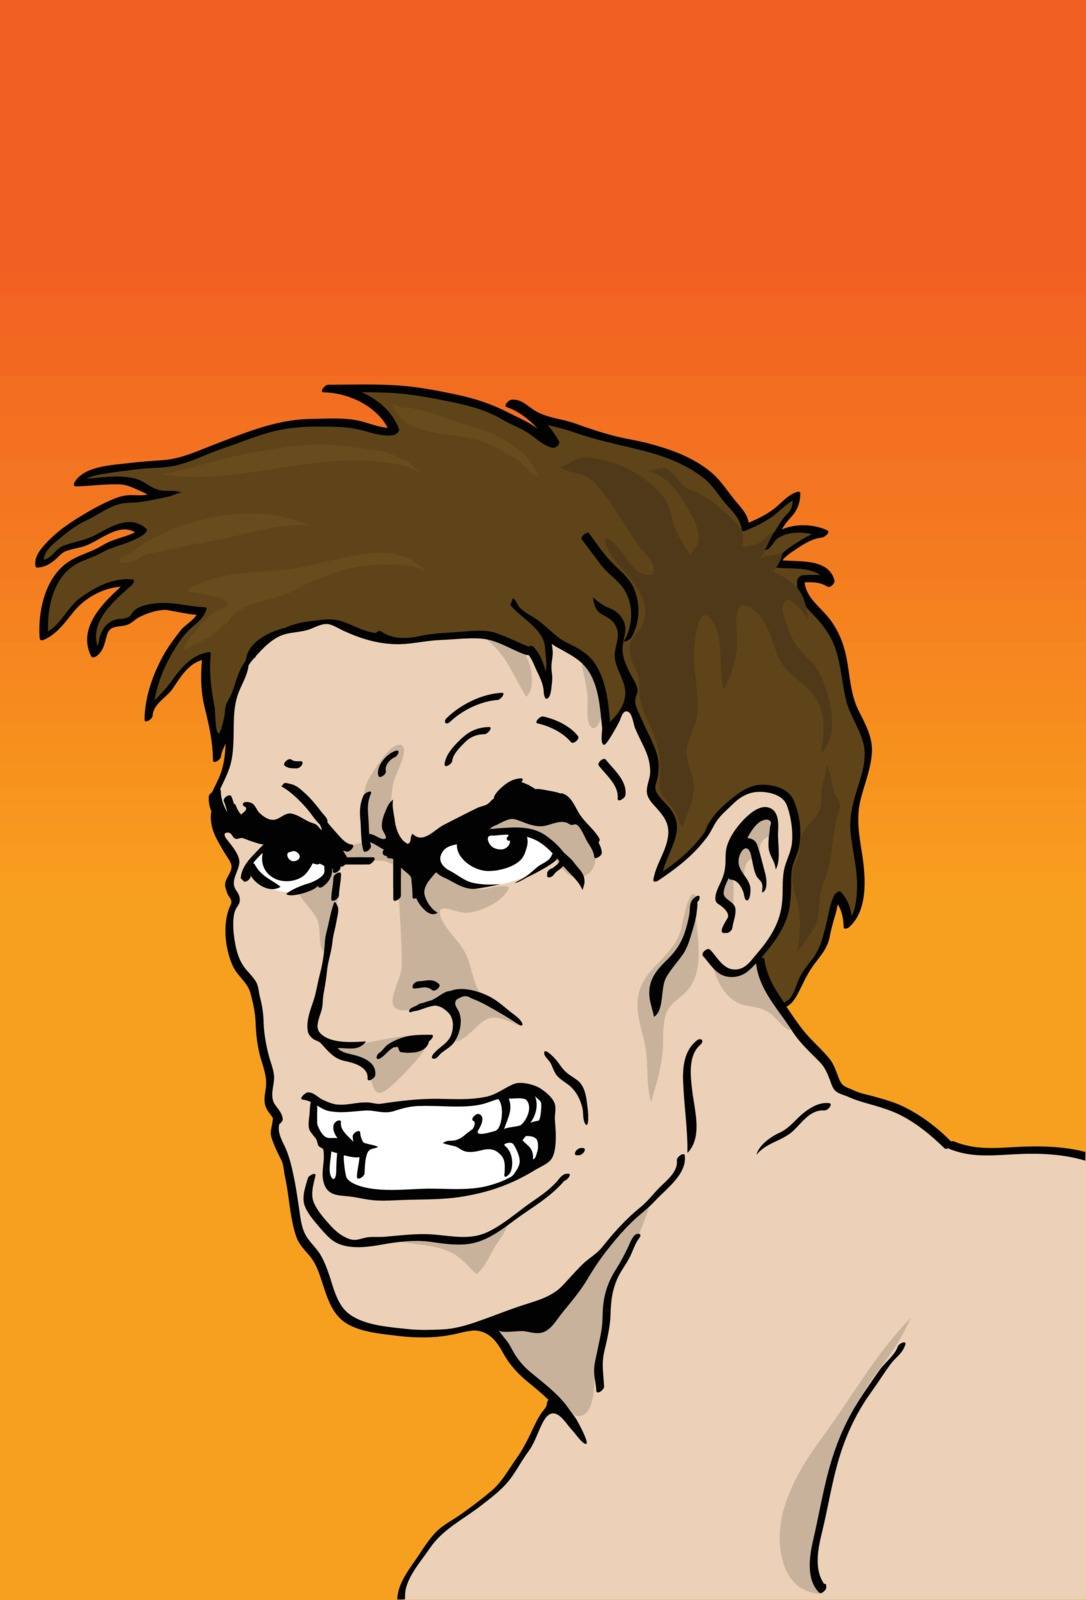 Illustration of an angry man.